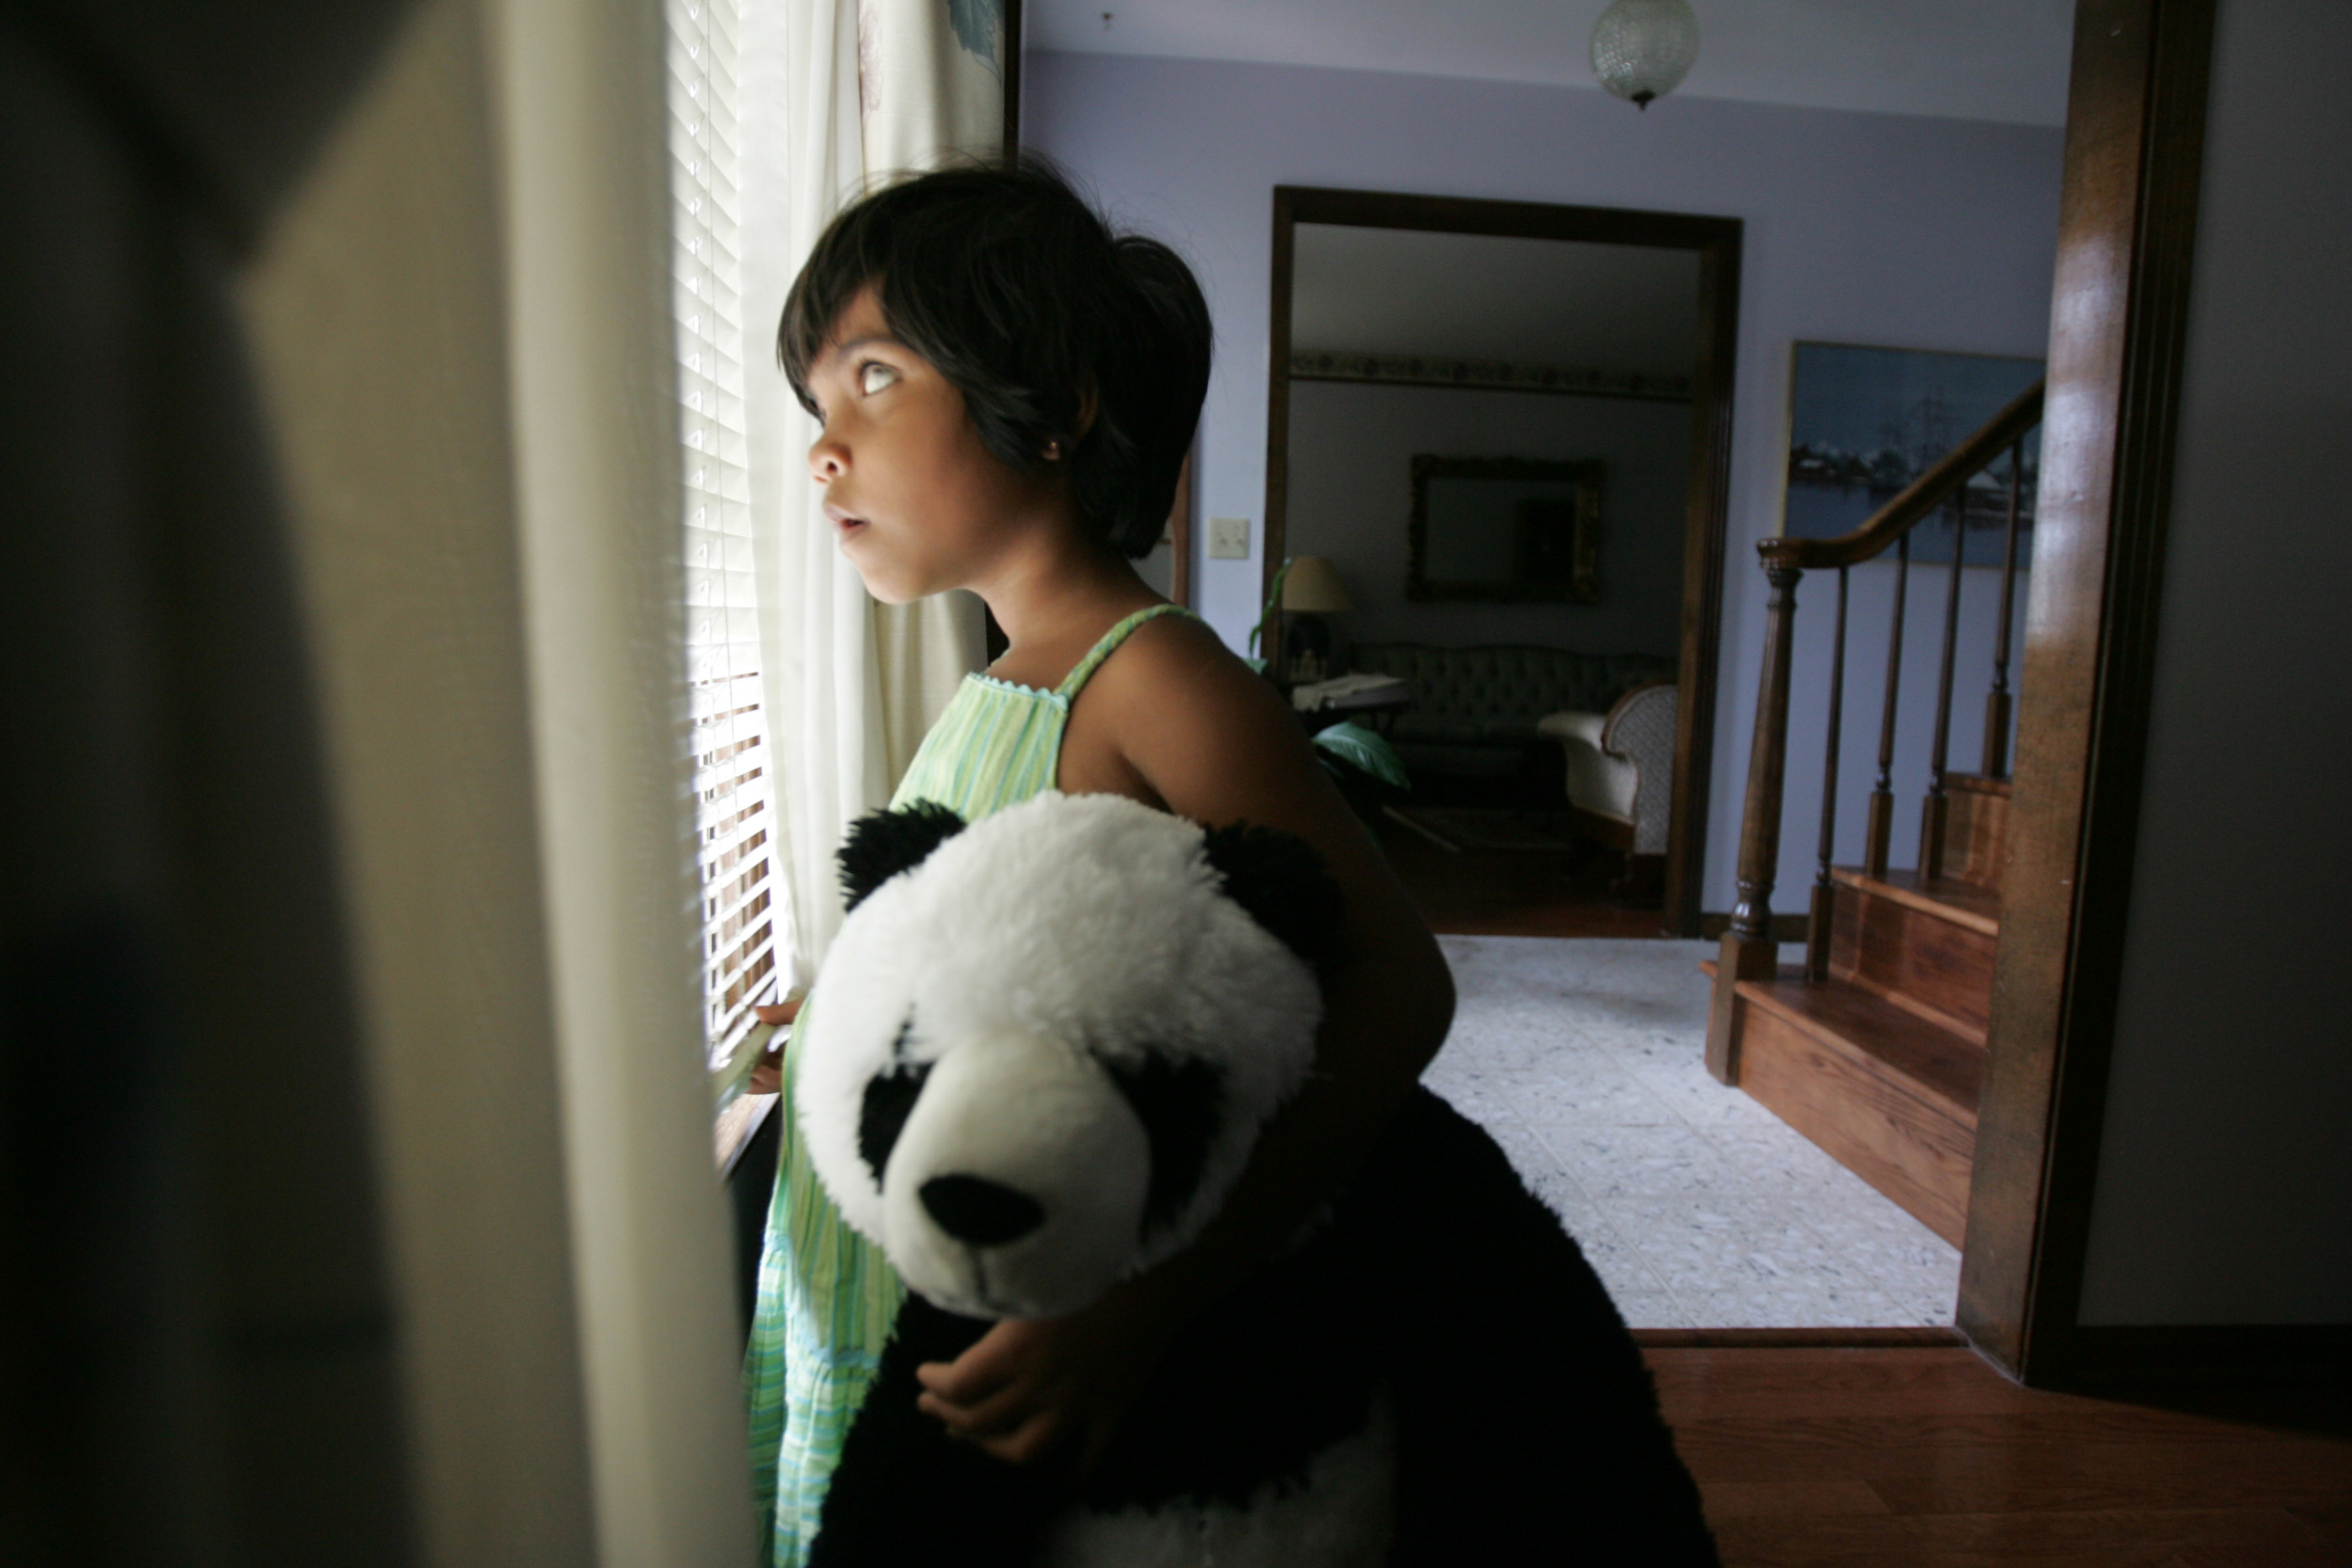  Kajal stands in front of a window at a second host family's house in Bellevue September 13, 2007. Her future uncertain, Kajal's journey in the U.S. has been fraught with complications and heartbreak.  